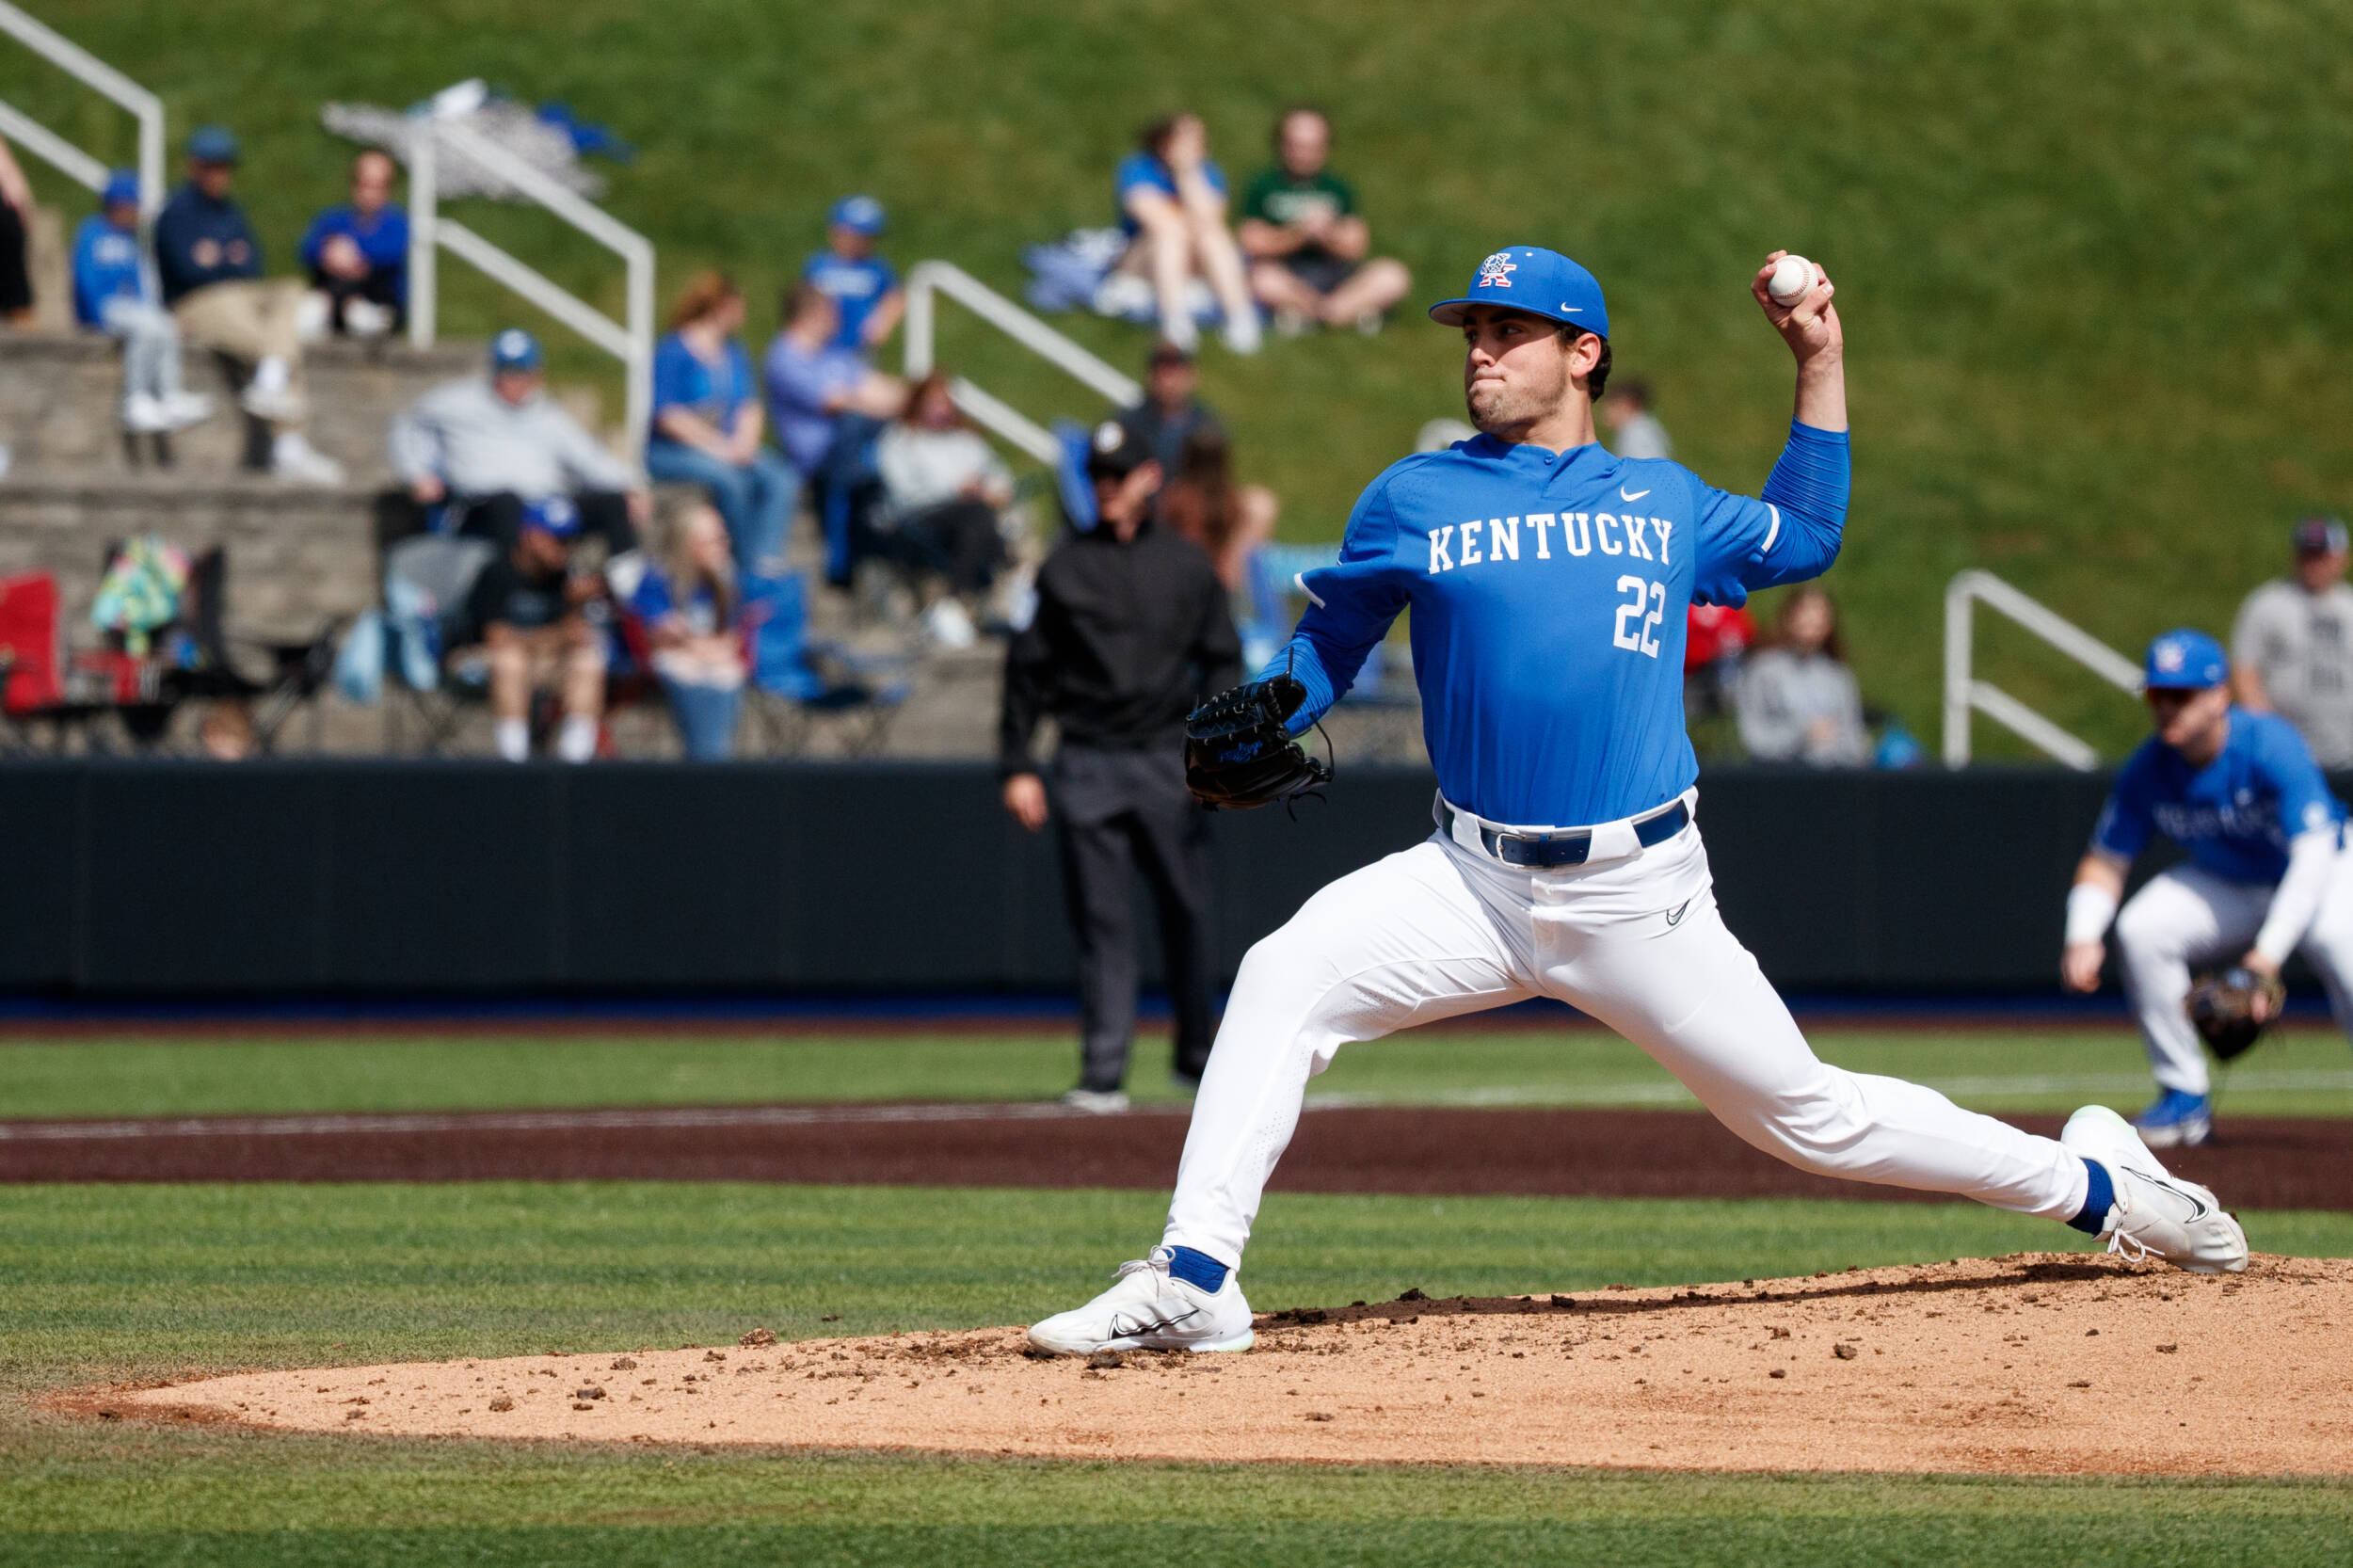 Kentucky Claims Series over No. 25 Georgia on Dom Day